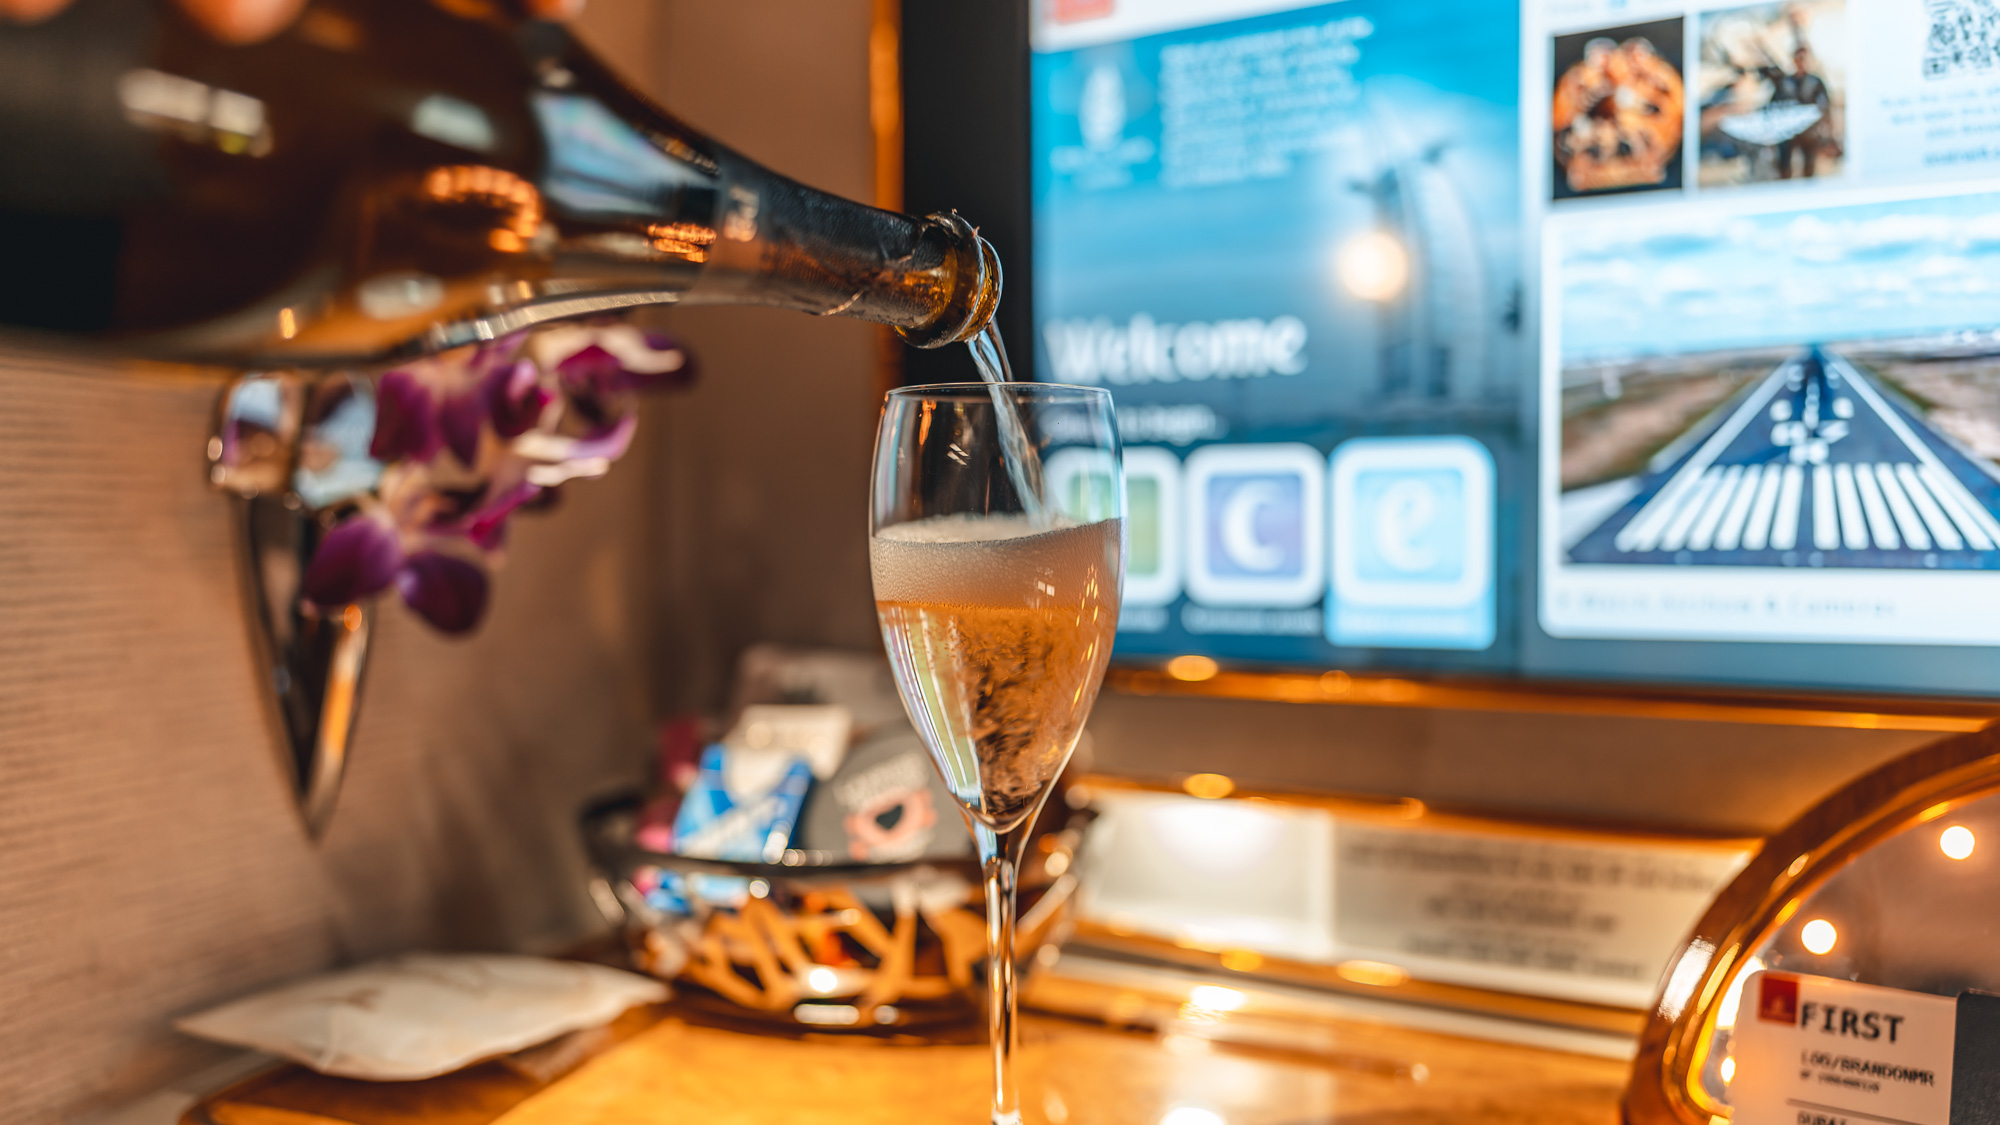 Emirates Boeing 777 First class pouring Champagne